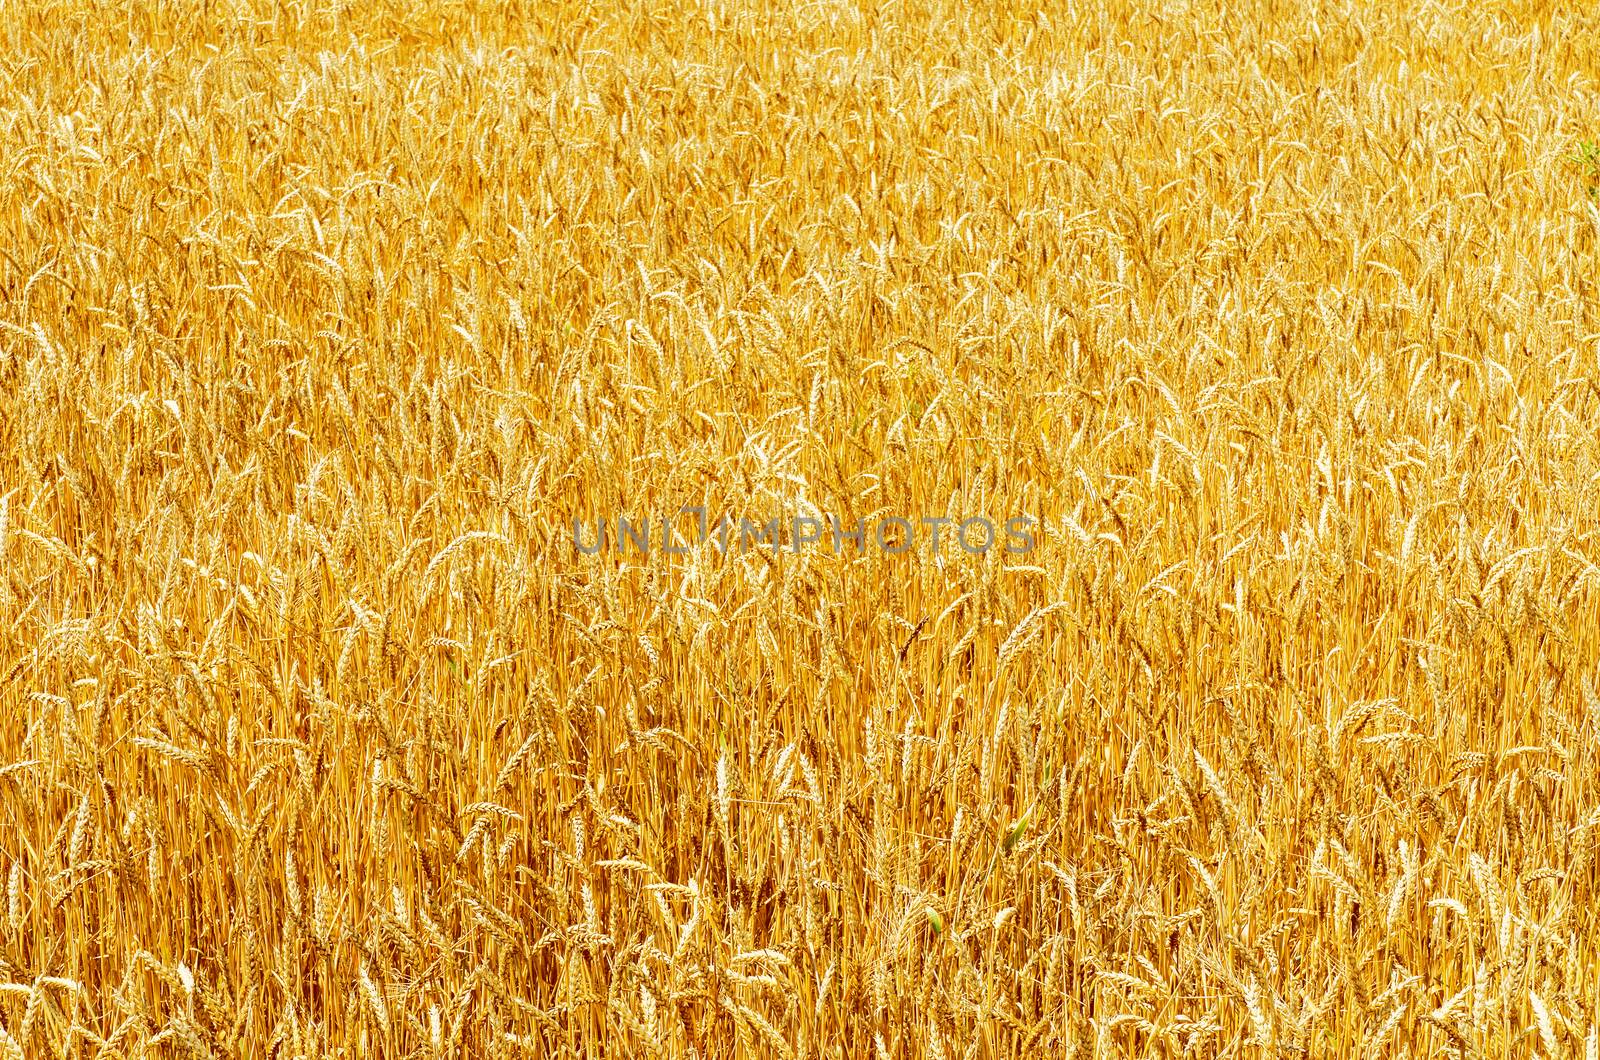 yellow ripe harvest field by mycola